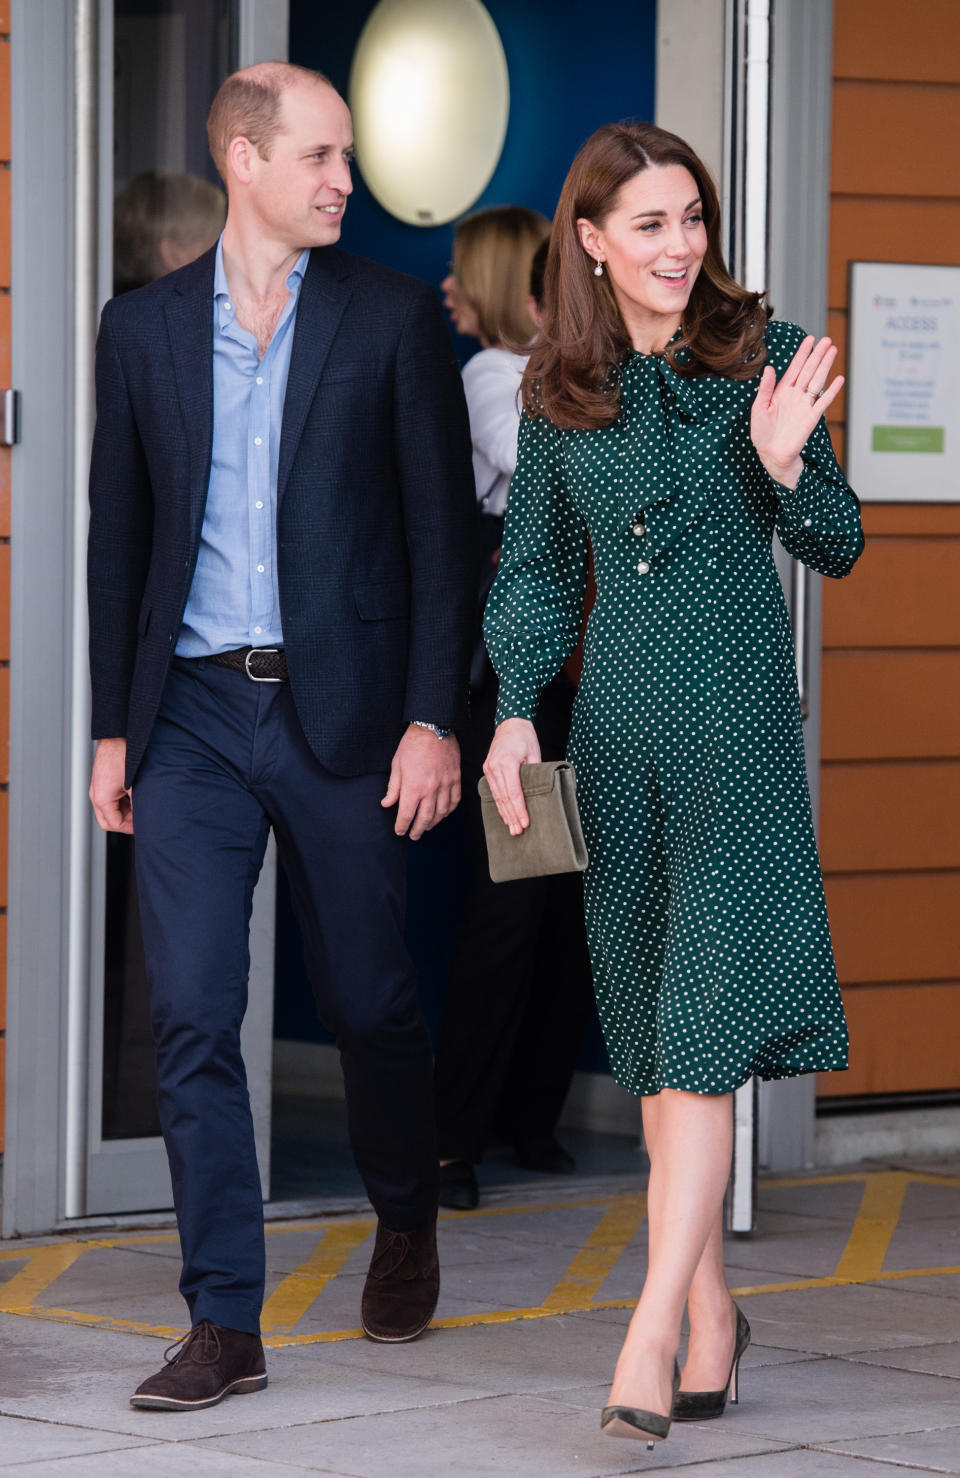 Prince William attended the event with Kate. [Photo: Getty]